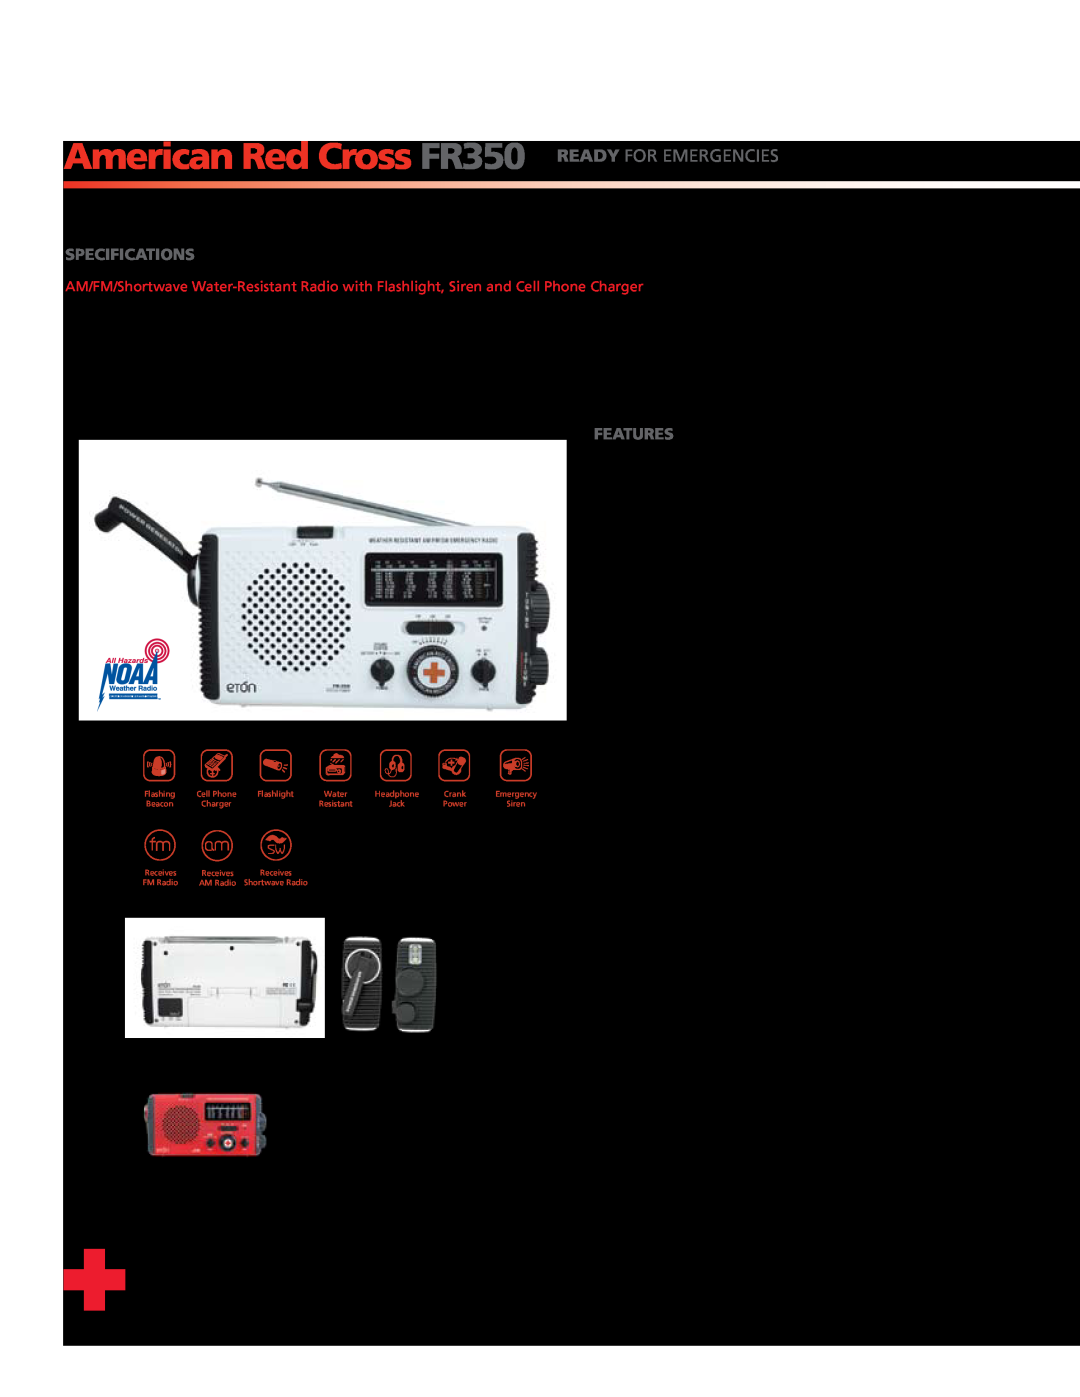 Eton FR350 owner manual Self-Powered Water-ResistantAM/FM/Shortwave Radio, with Flashlight, Siren and Cell Phone Charger 